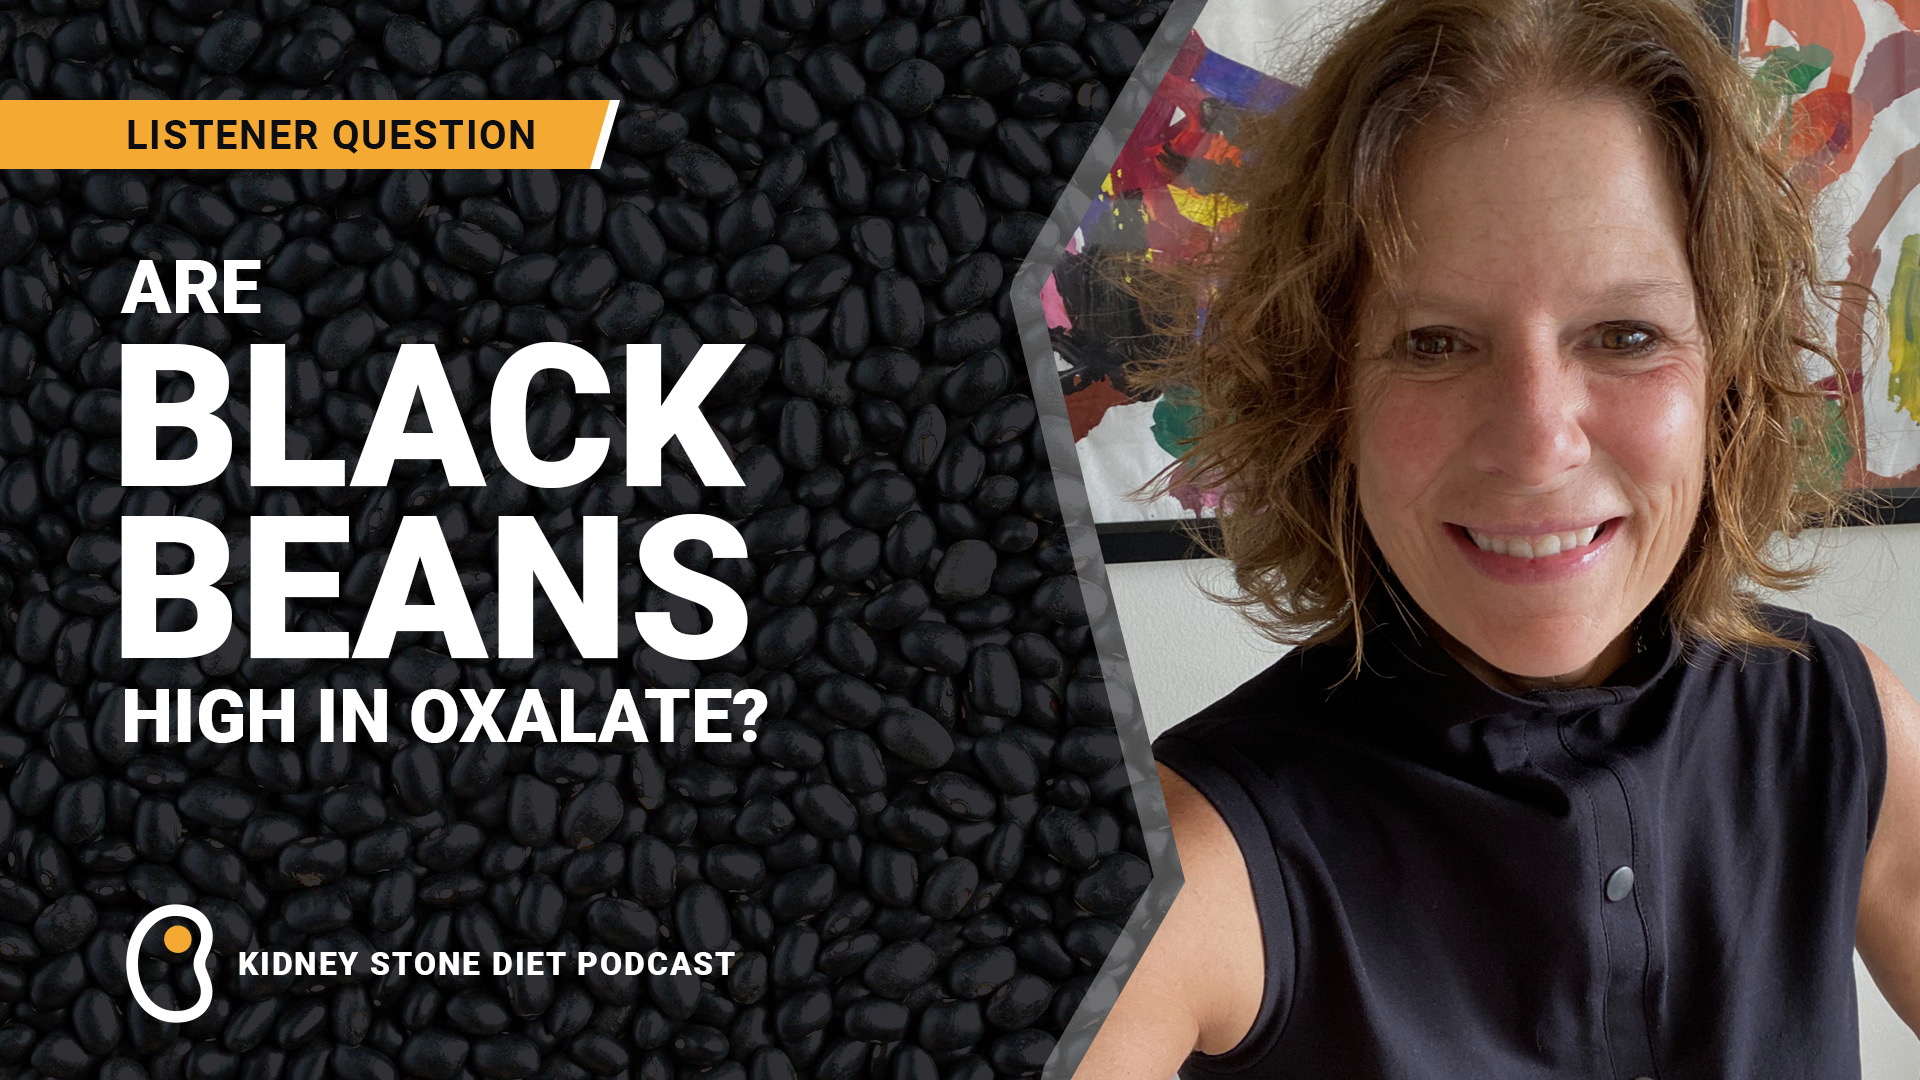 Are black beans high in oxalate?